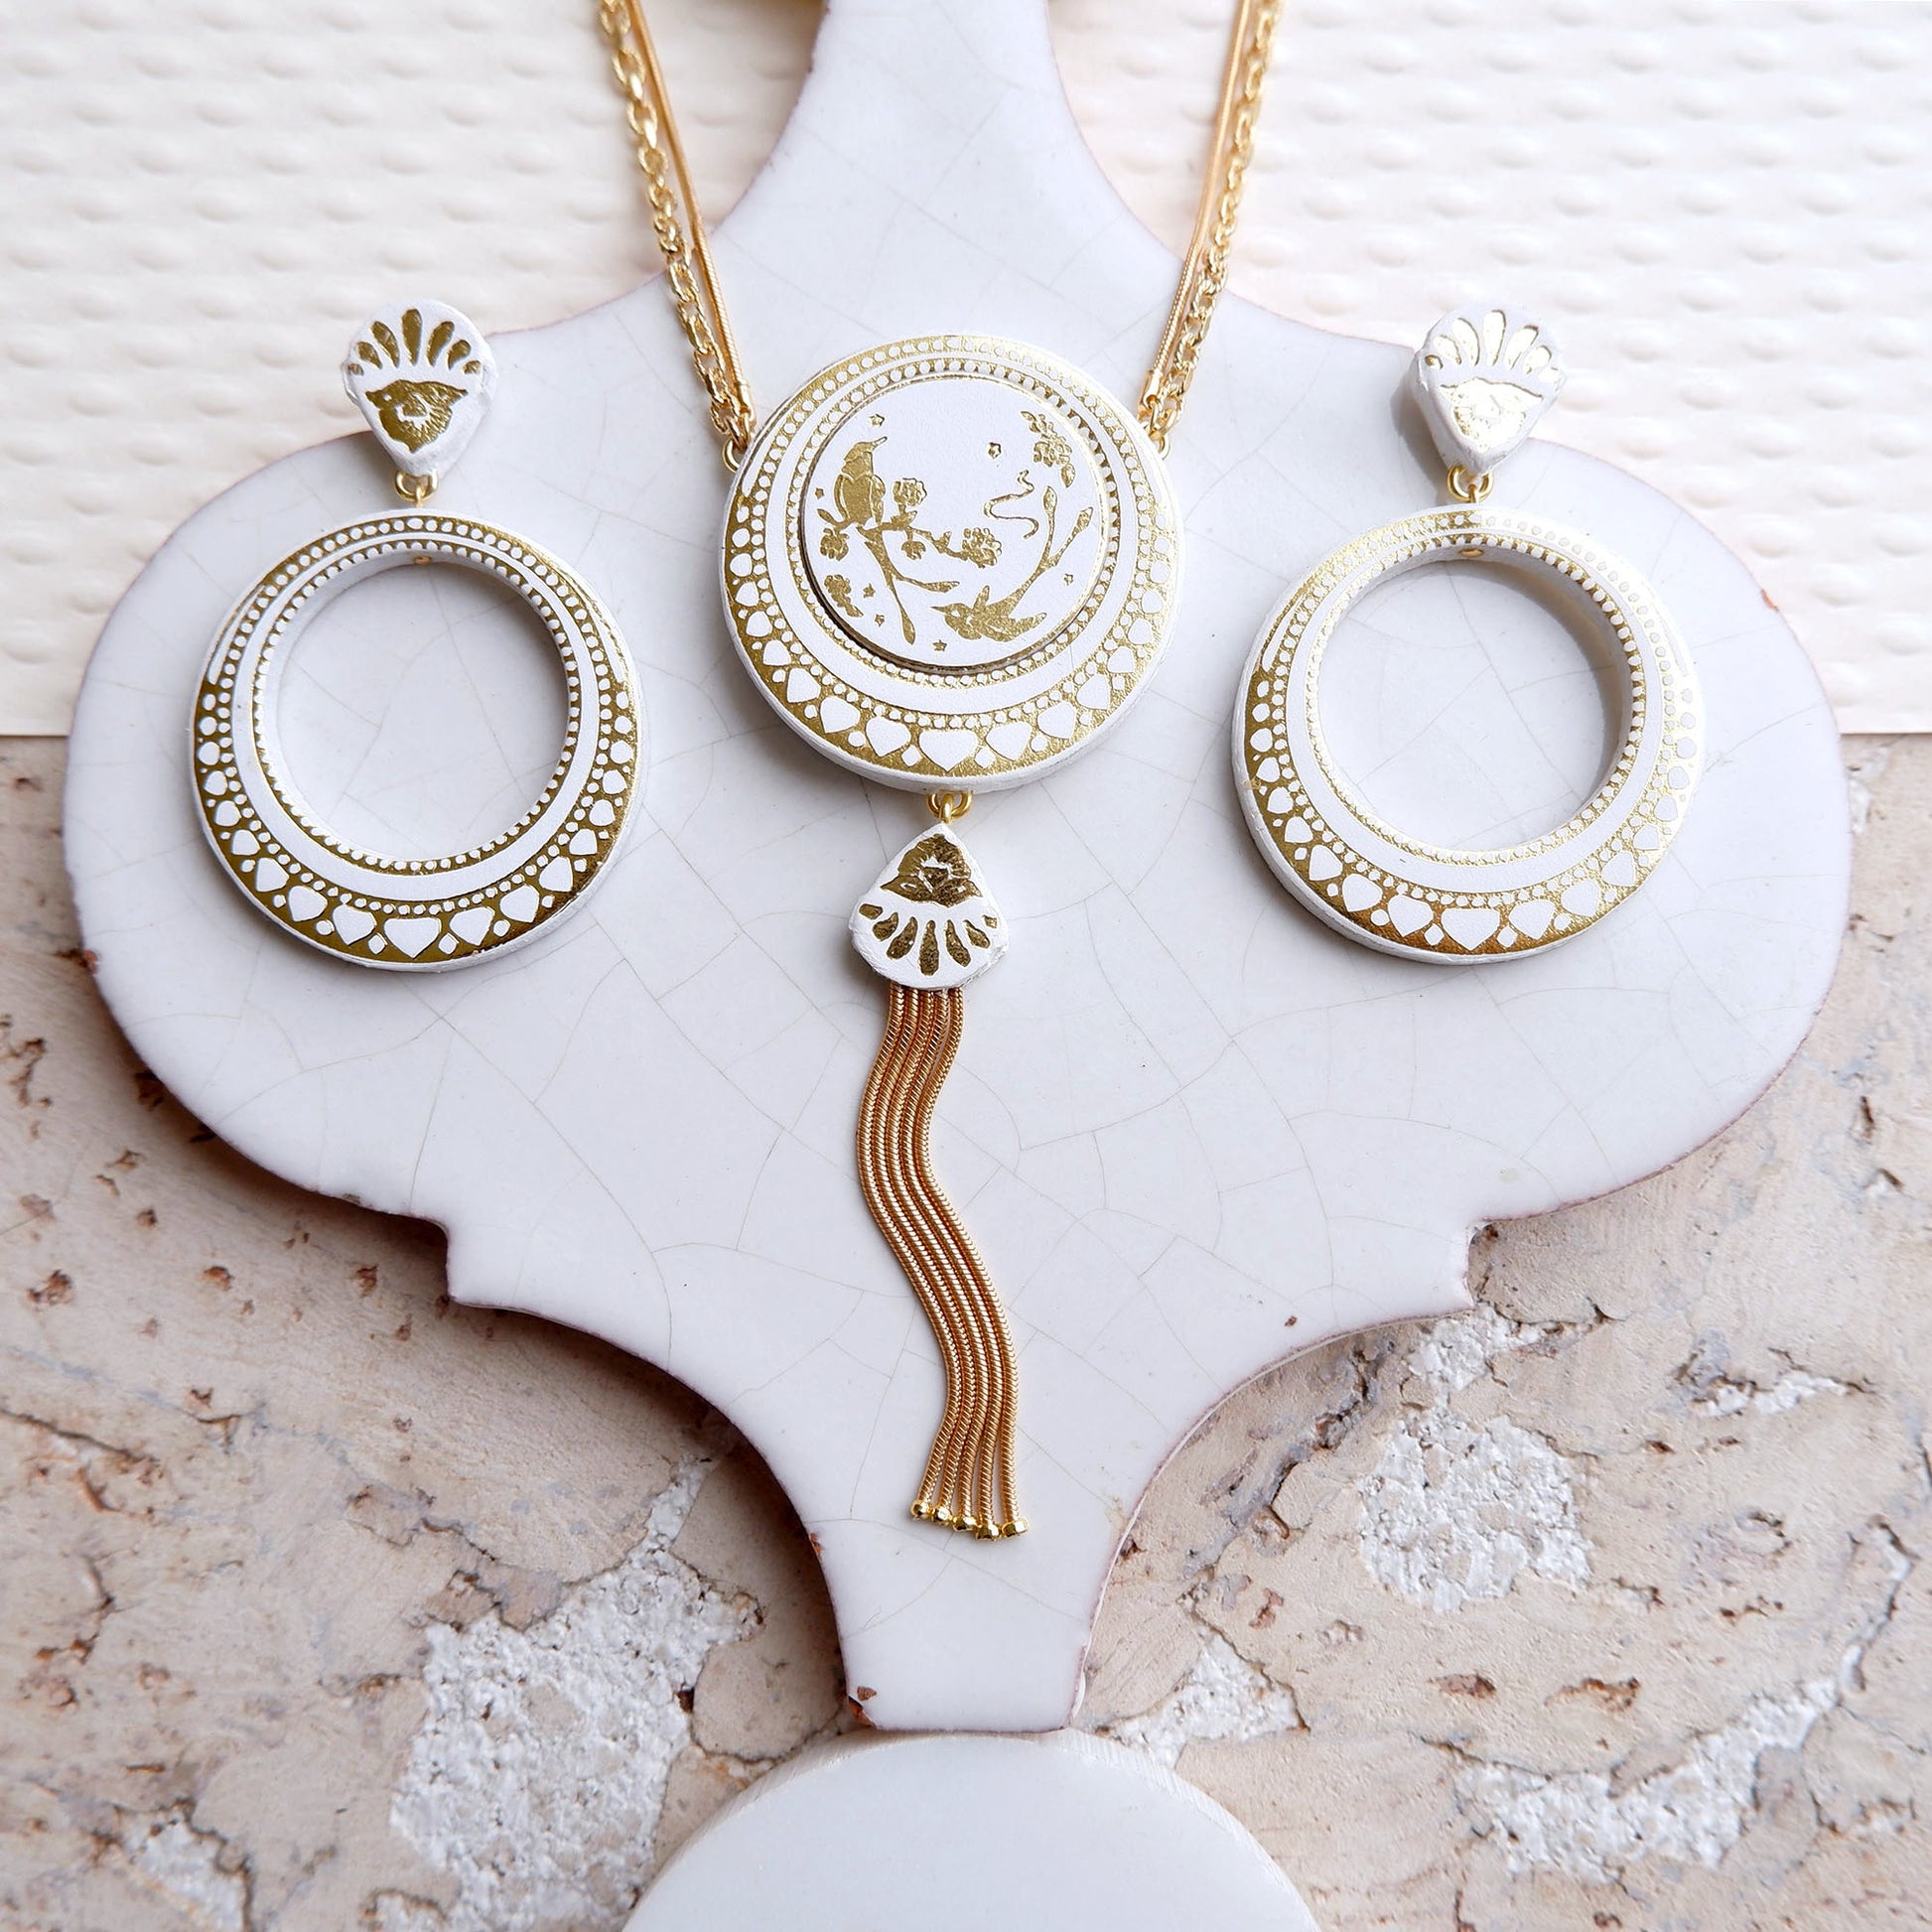 white & gold leather tasselled medallion necklace & matching hoops earrings